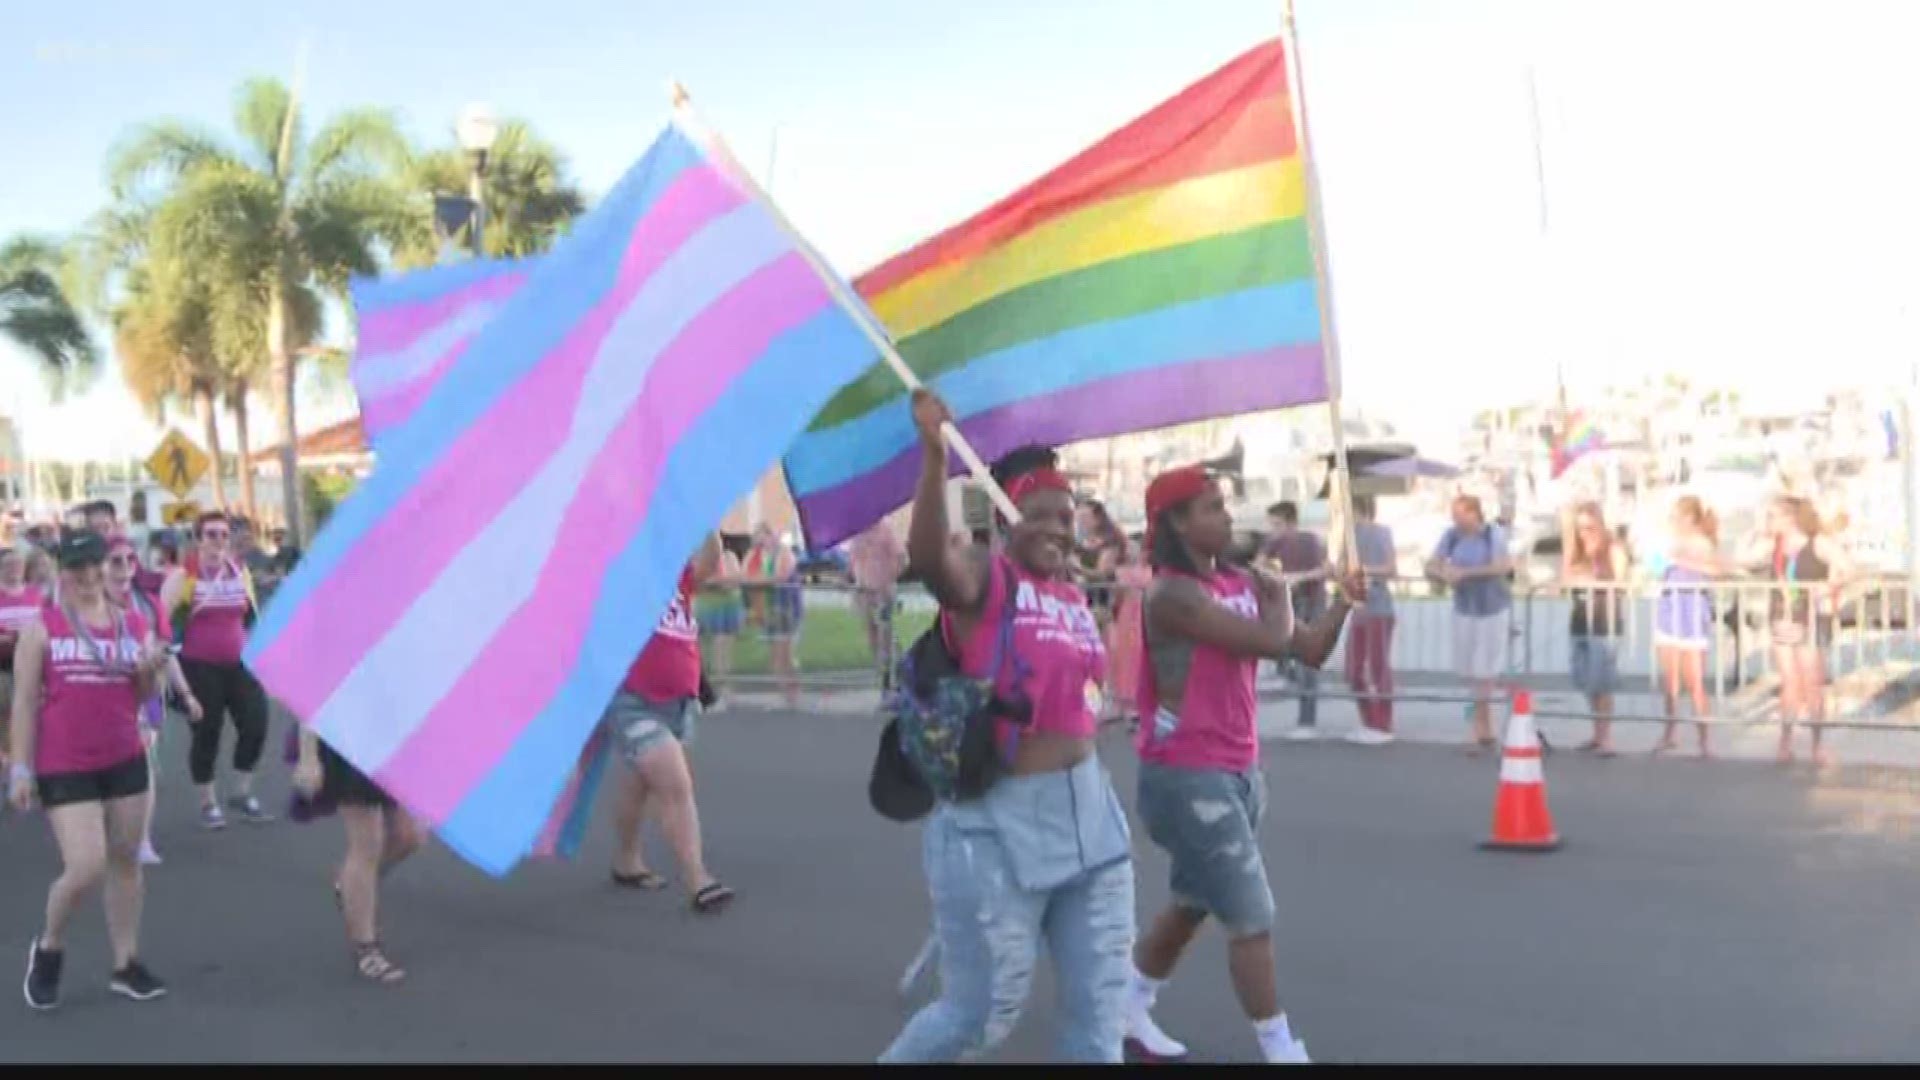 The party kicks off at 2 p.m. with the parade stepping off around 7:15 p.m. Saturday. Thousands of people will be dressed in rainbow colors, beads, glitter and costumes to celebrate LGBTQ Pride. The parade starts at North Straub Park and heads south almost to Albert Whitted Park.